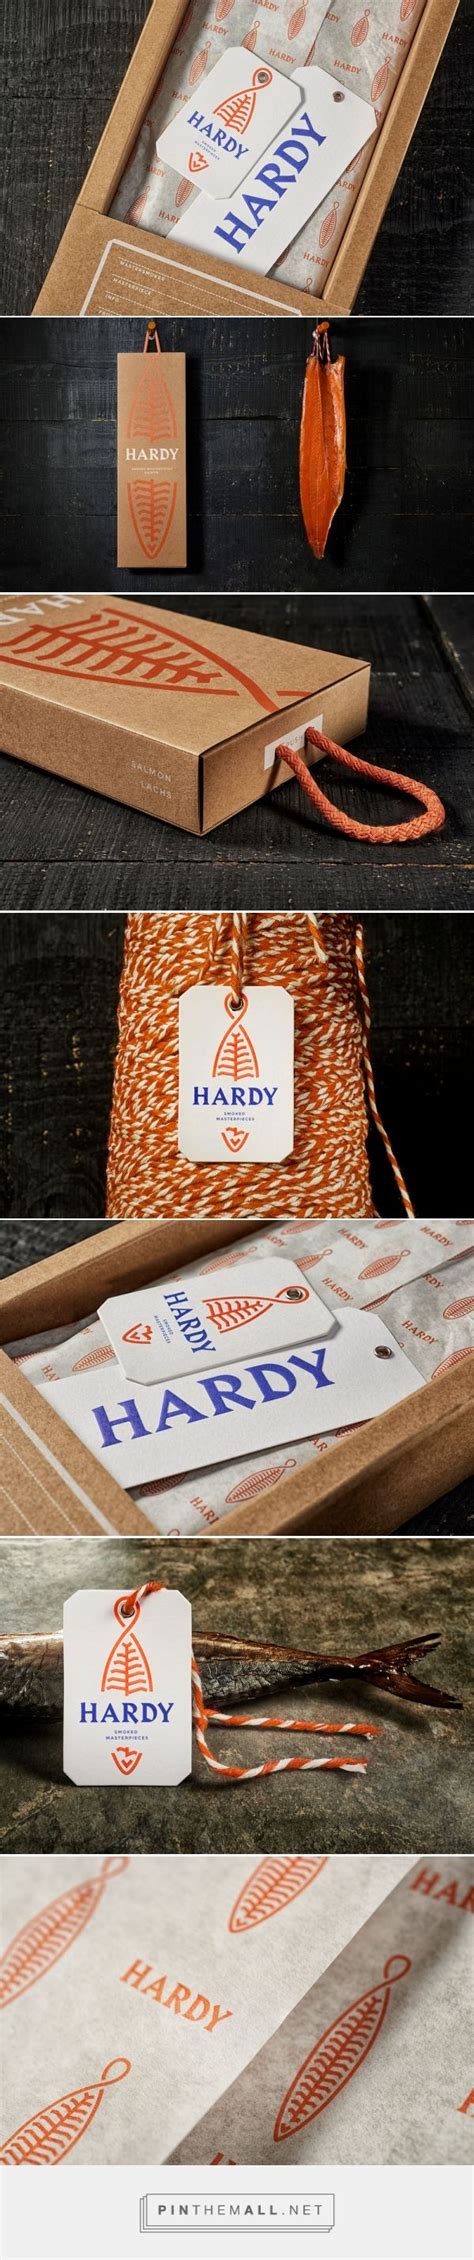 Check Out The Elegant Packaging For This Seafood Product Brand — The